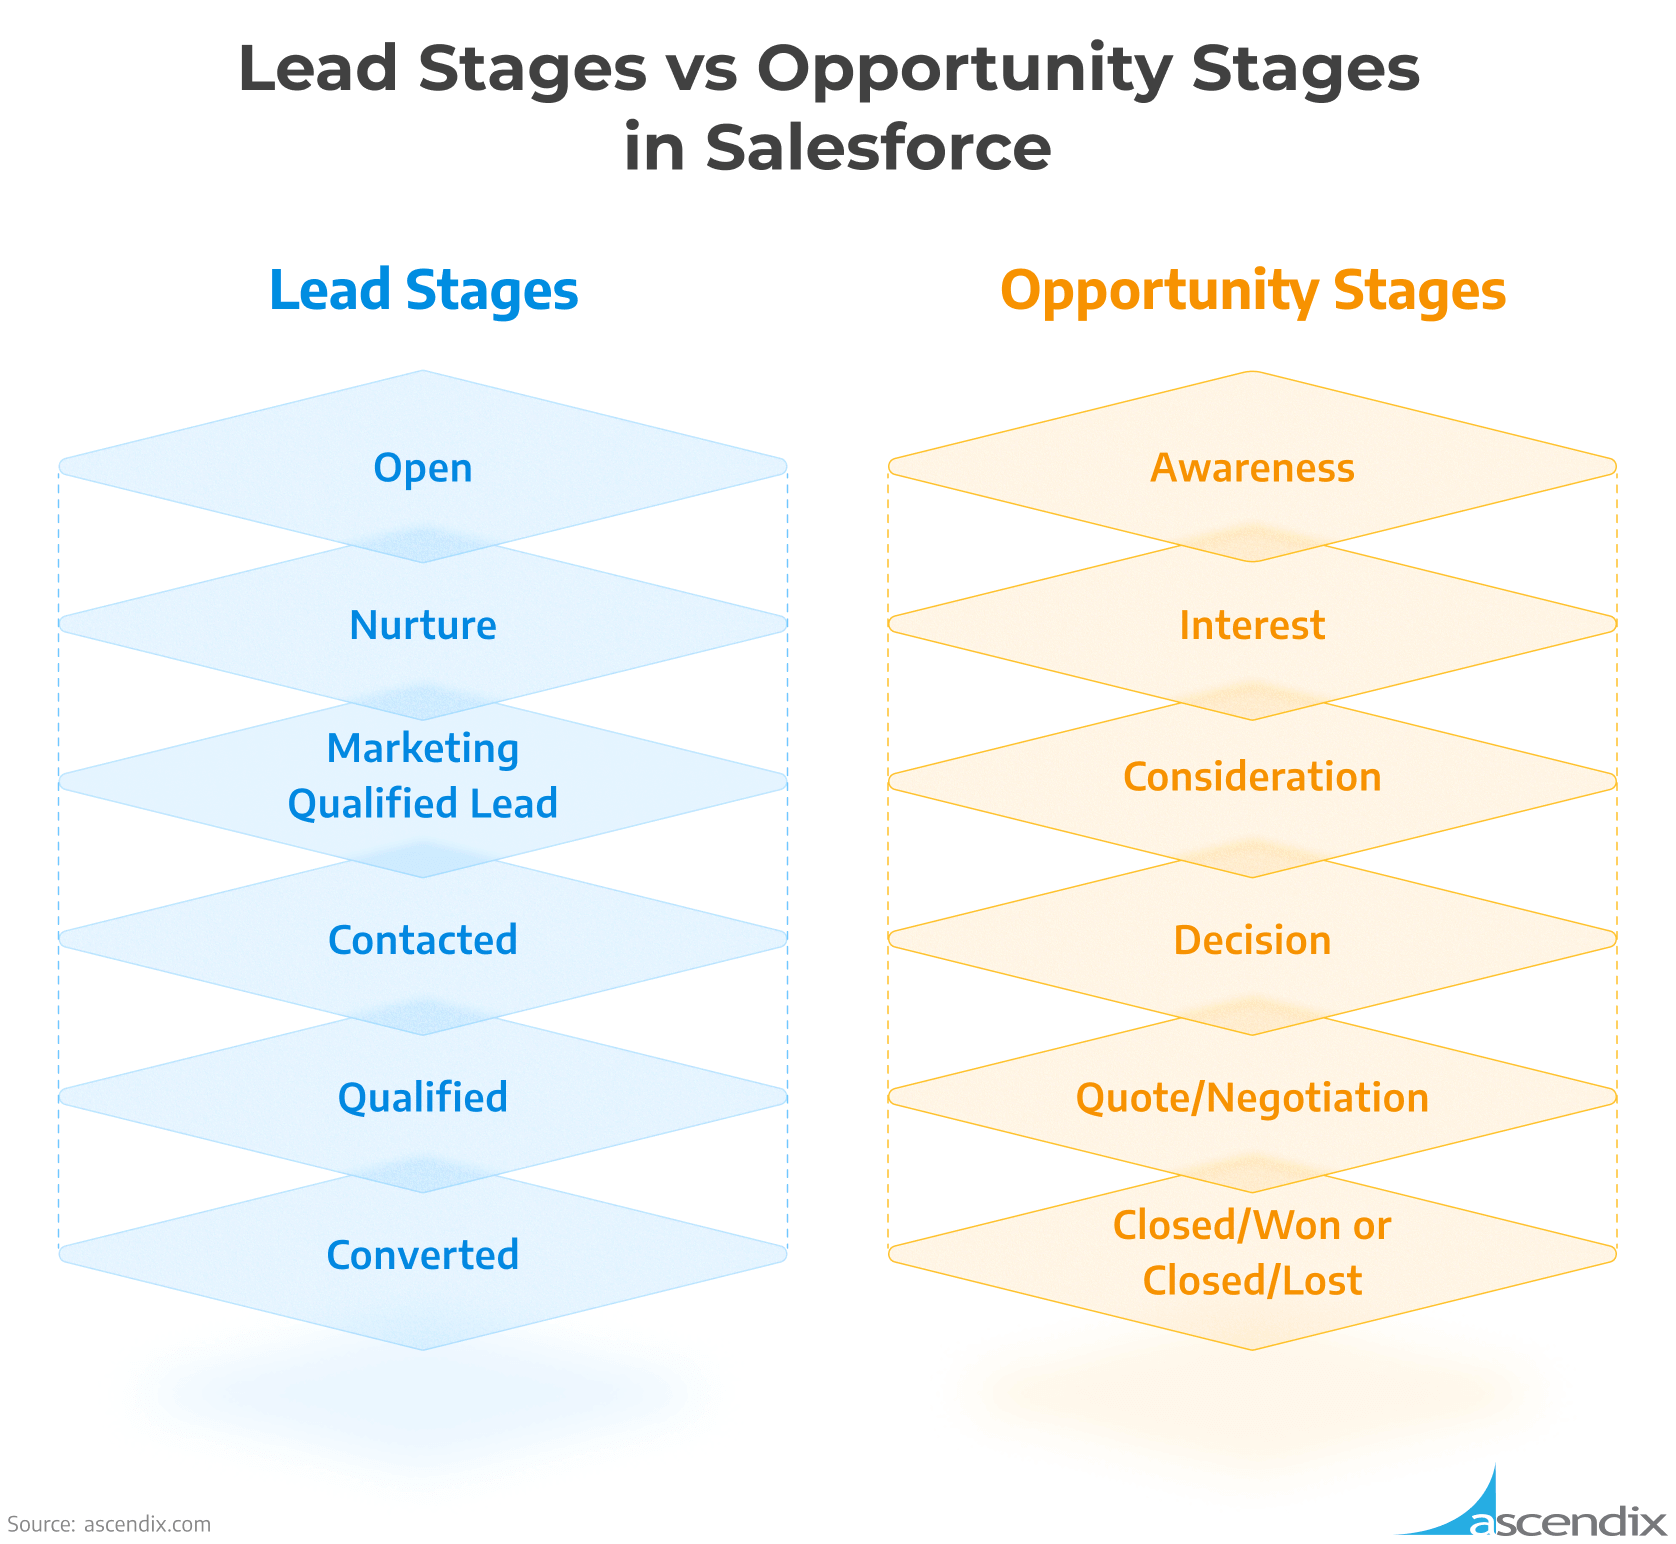 Lead Stages vs Opportunity Stages in Salesforce | Ascendix